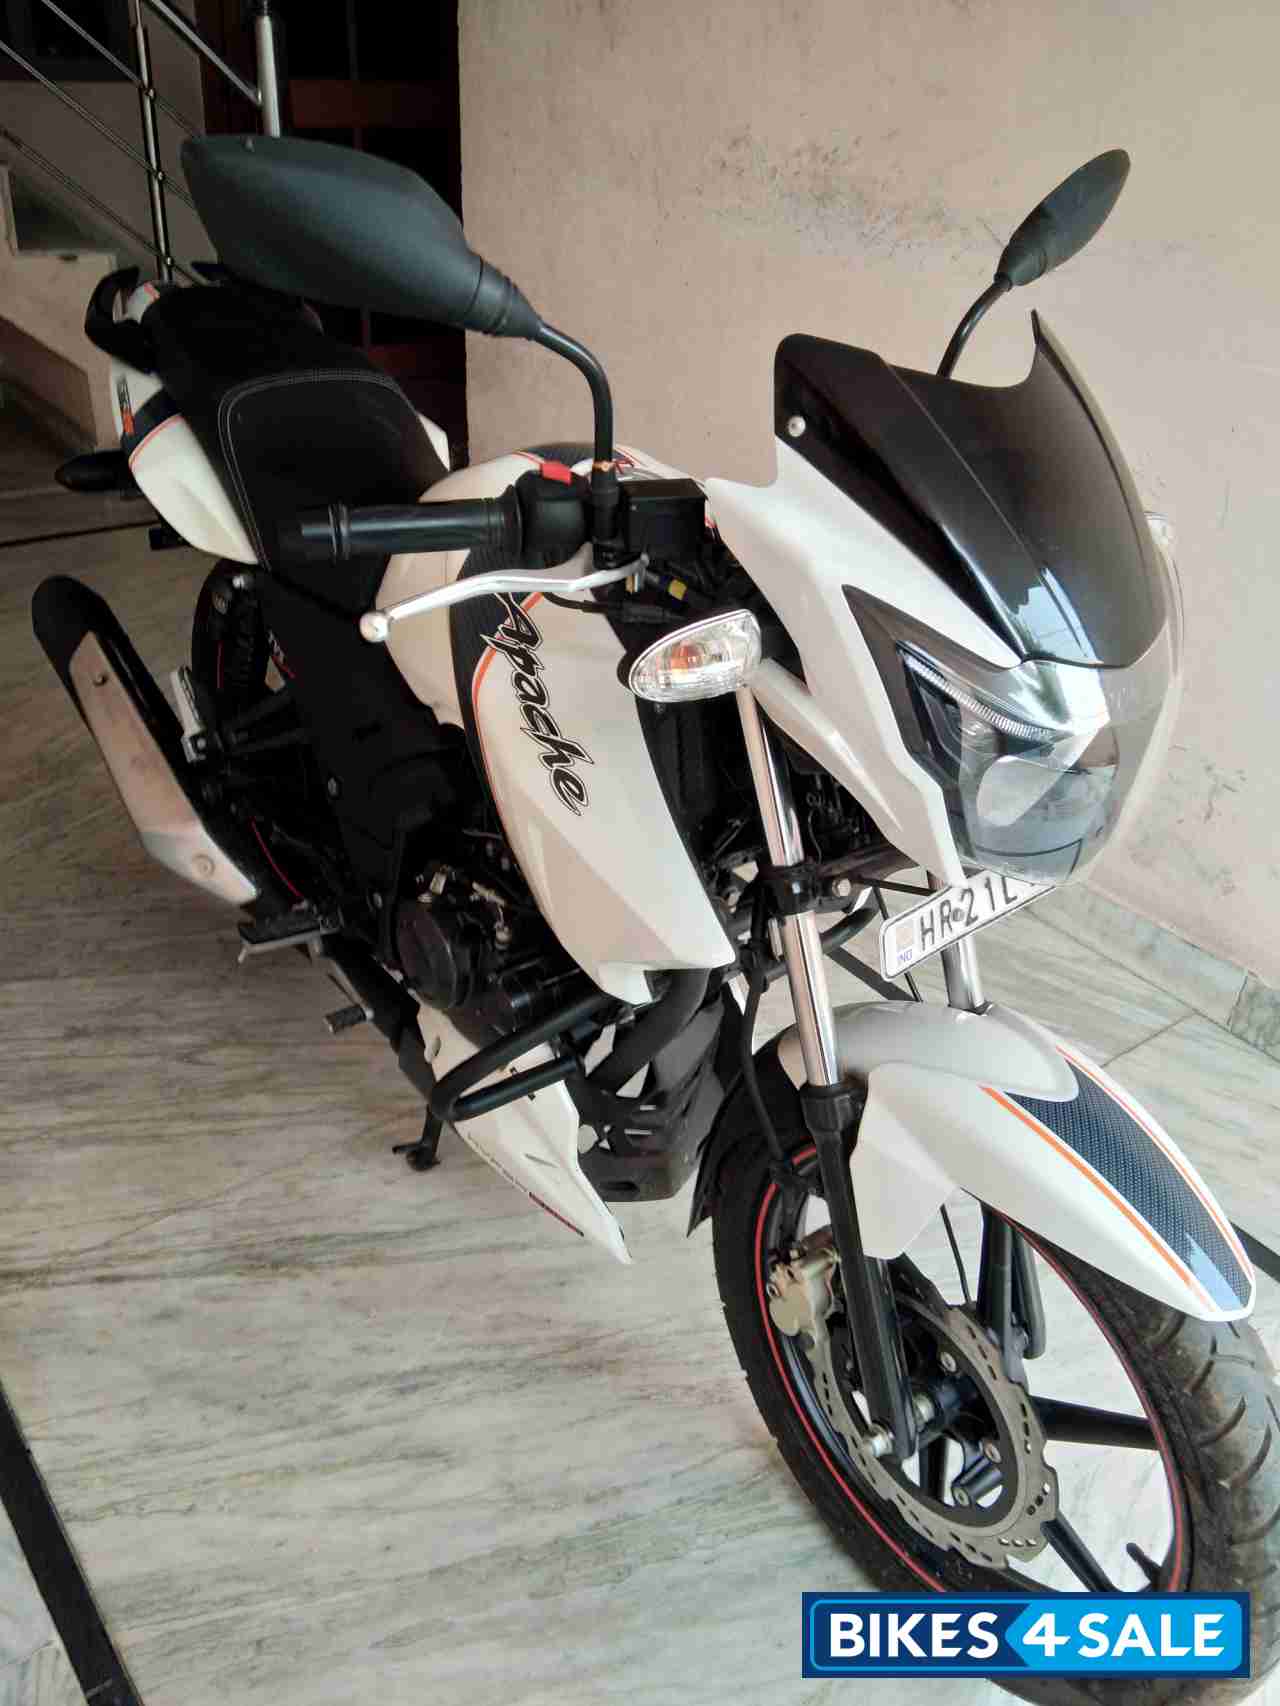 Used 2017 Model Tvs Apache Rtr 160 For Sale In Hisar Id 169457 White Colour Bikes4sale